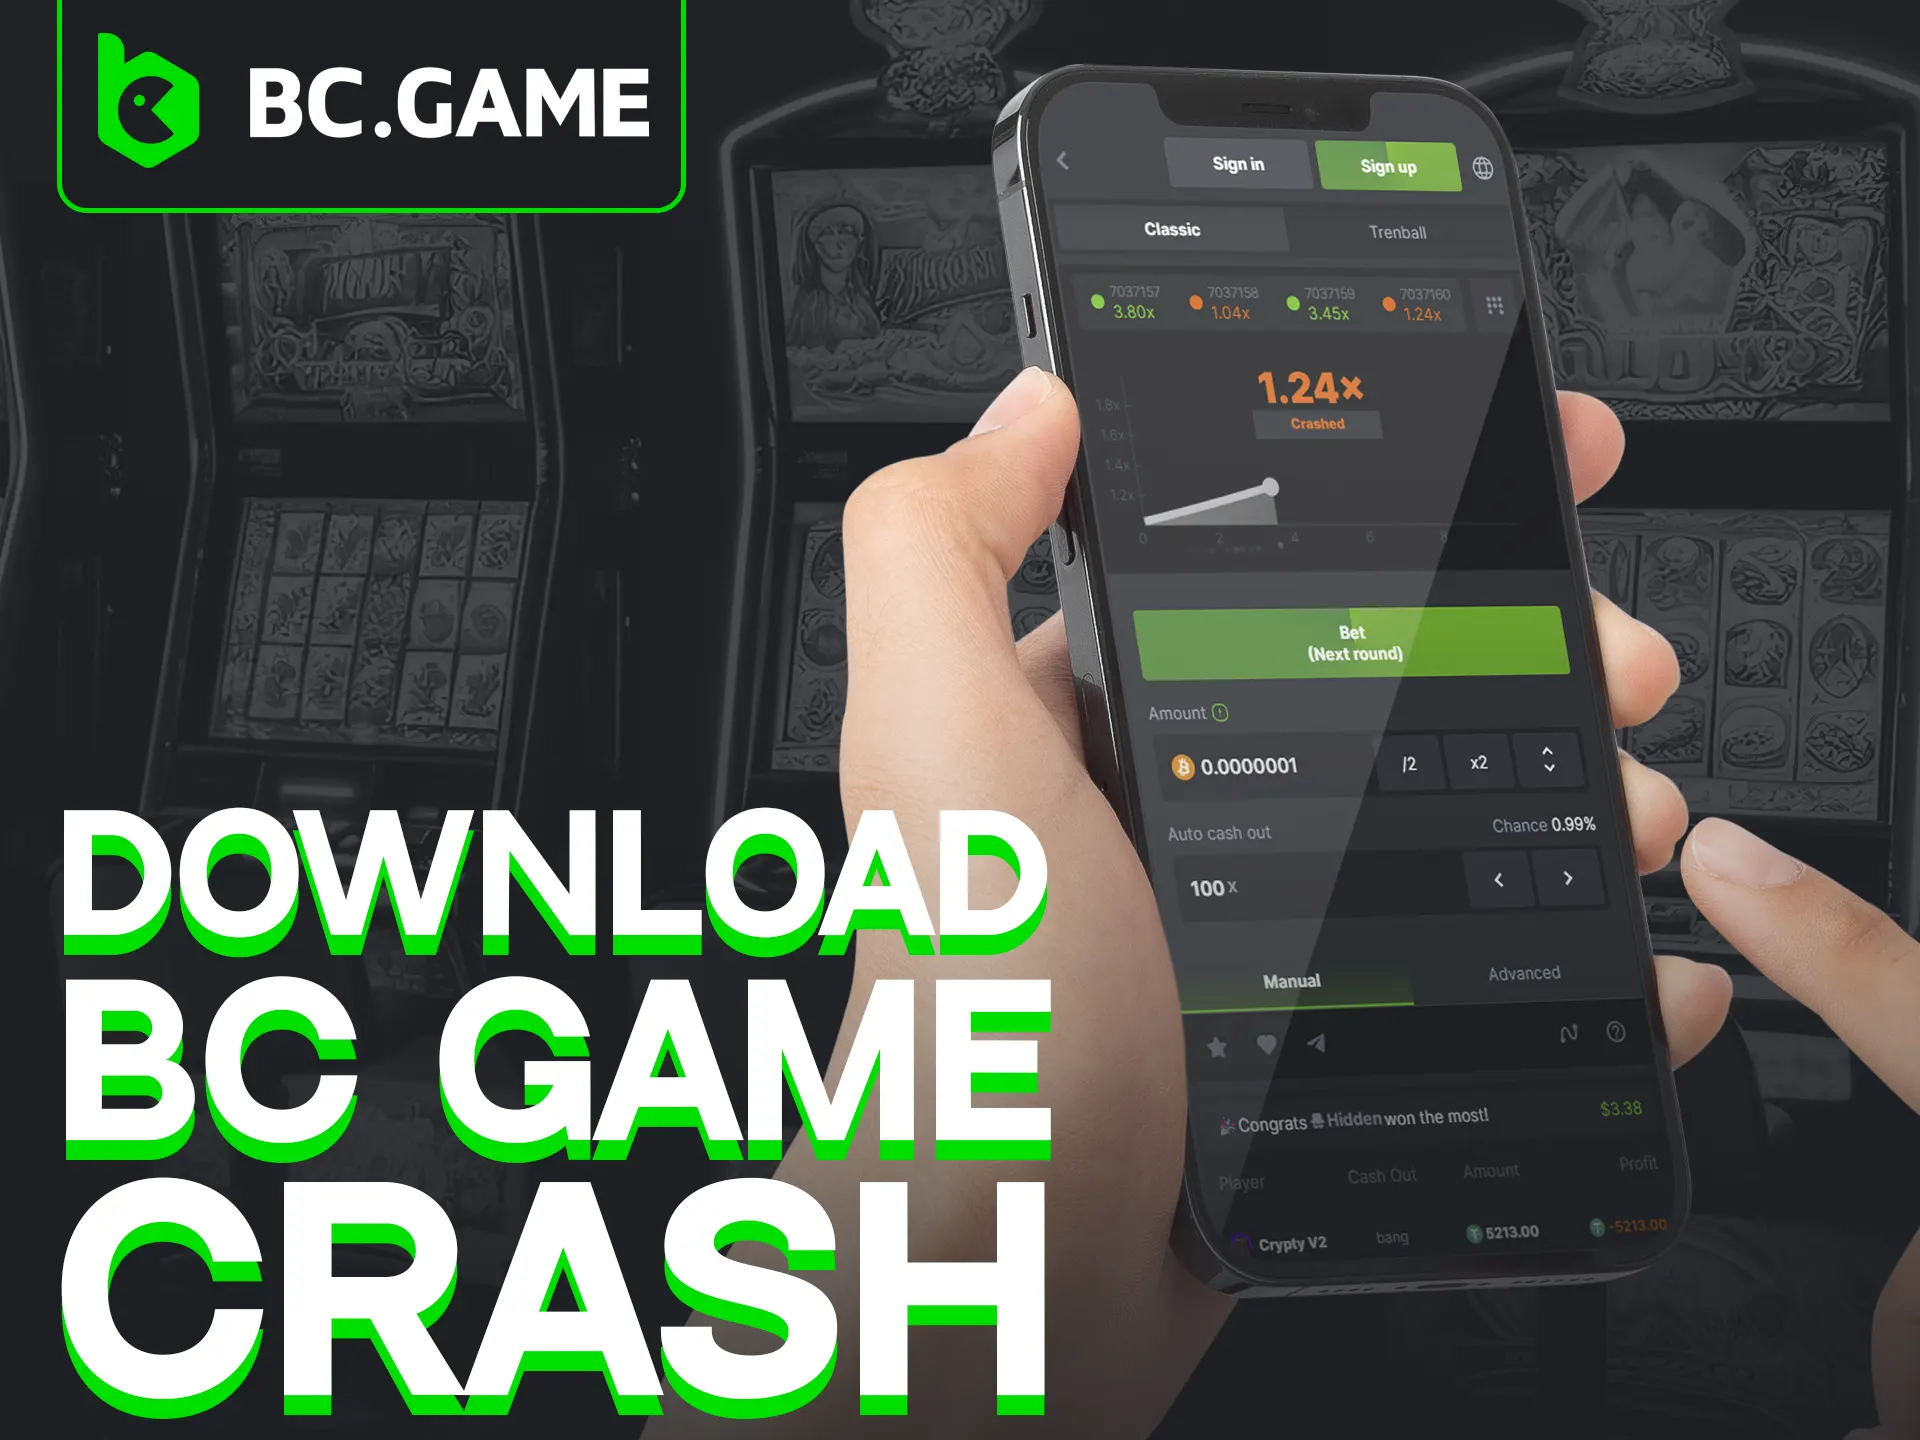 Get BC Game Crash on Android and iOS.